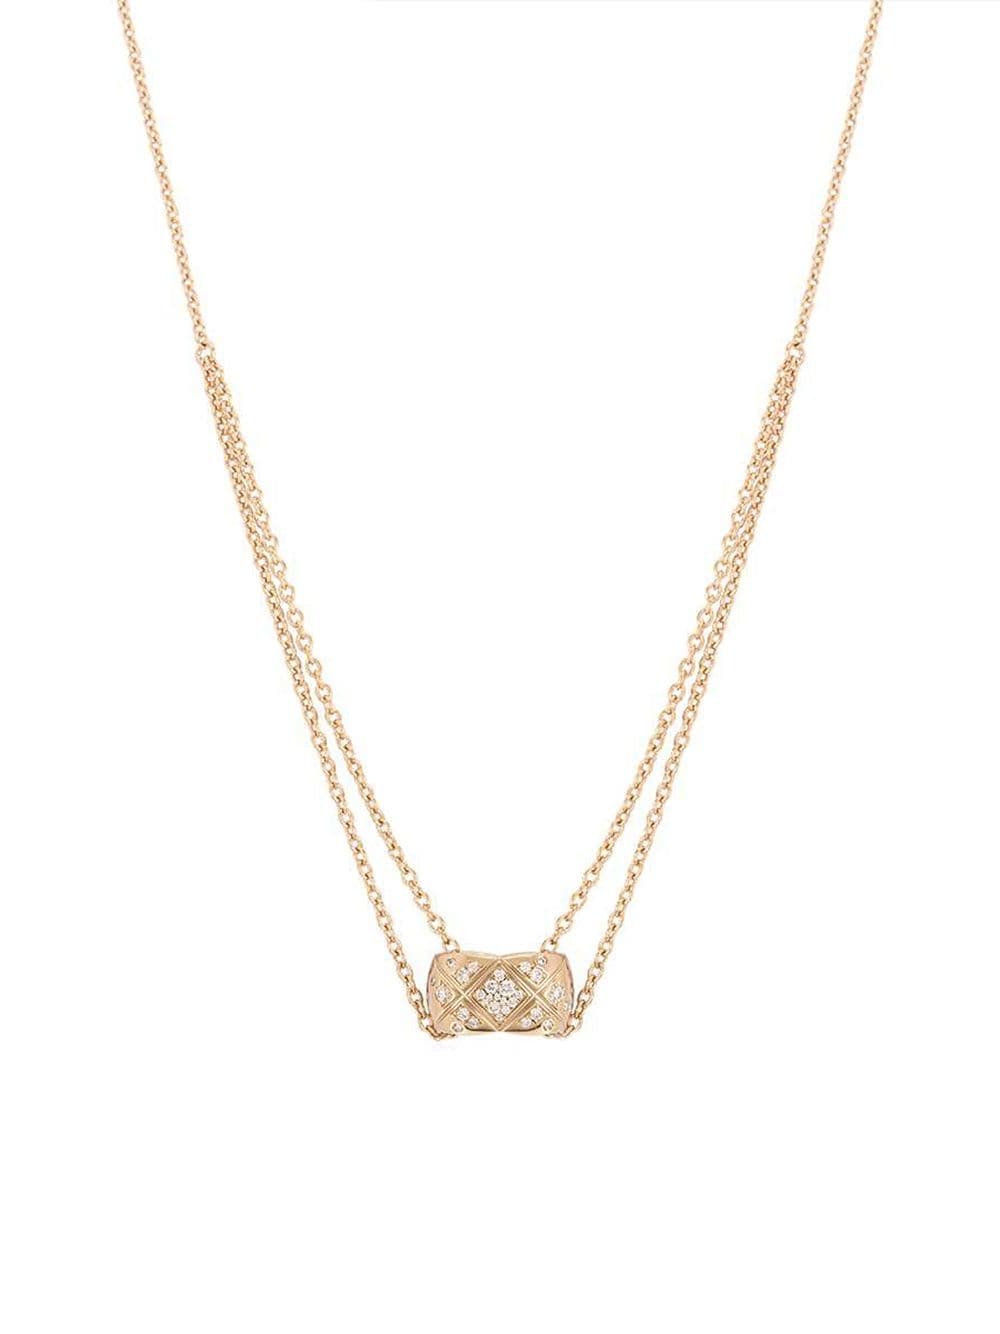 CHANEL Pre-Owned 18kt Rose Gold Coco Crush Quilted Diamond Pendant